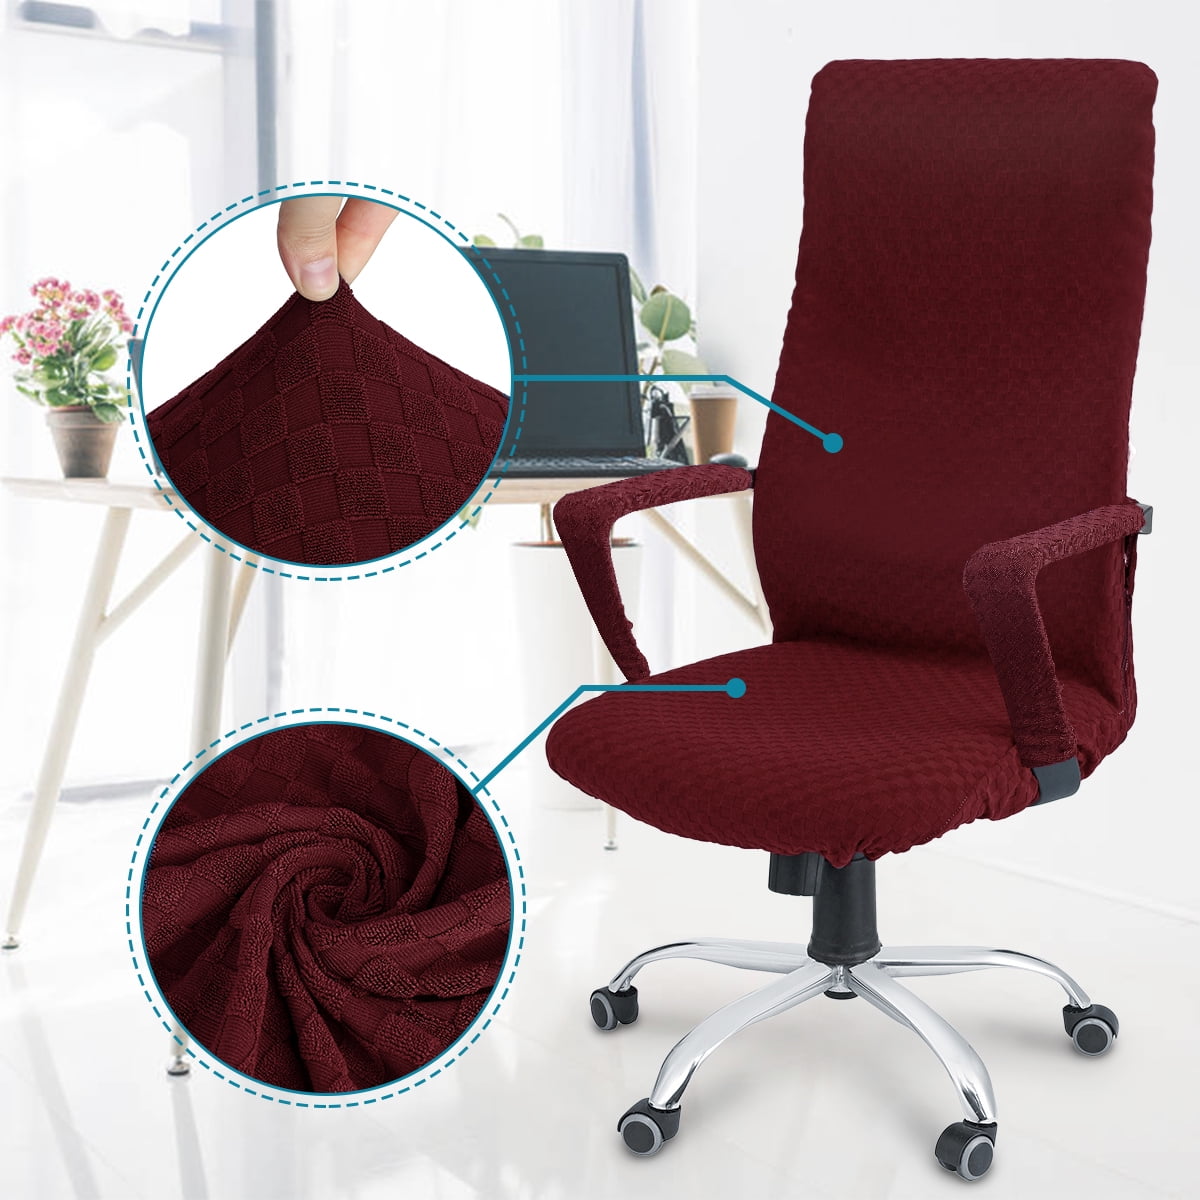 Details about   OFFICE CHAIR COVER High Back Large Black CAVEEN Chair Not Included 